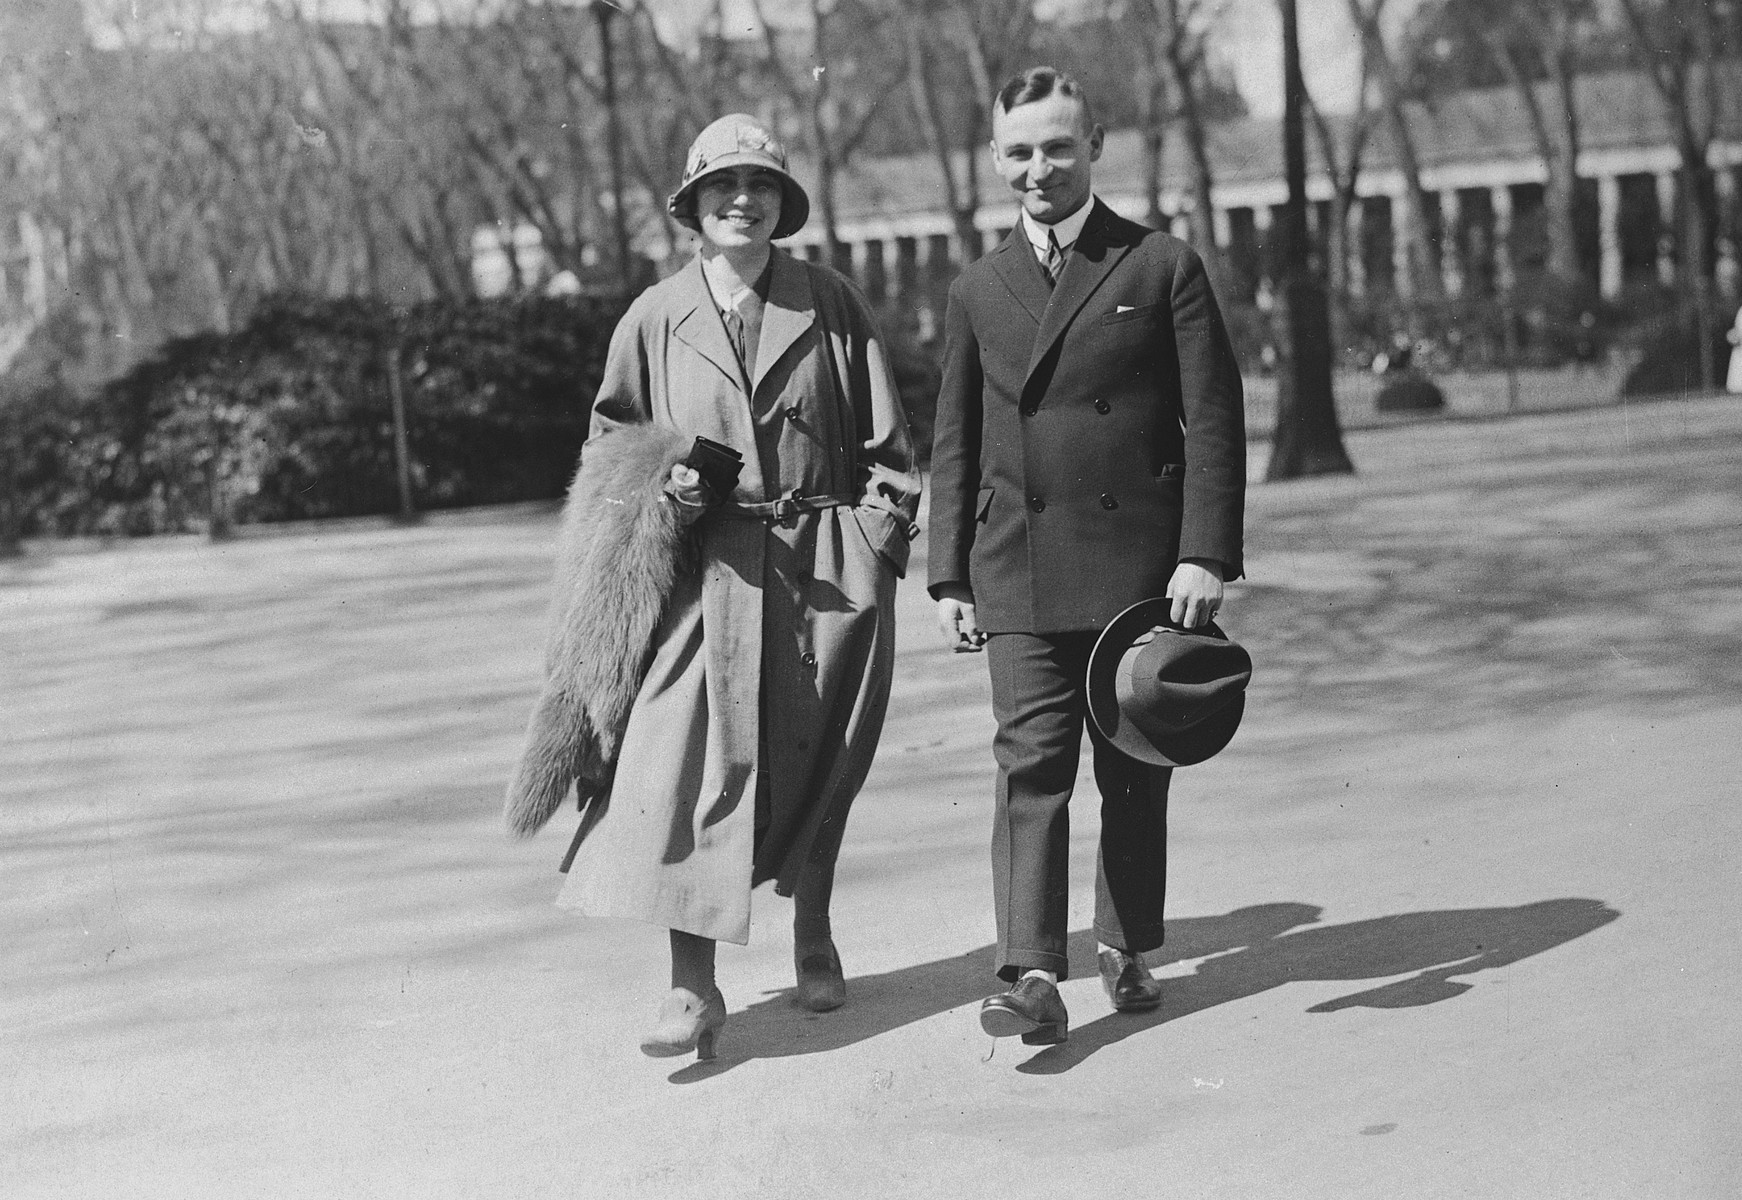 A German-Jewish couple walks down an open plaza in Wiesbaden, Germany.

Pictured are Julius and Grete Hermanns.